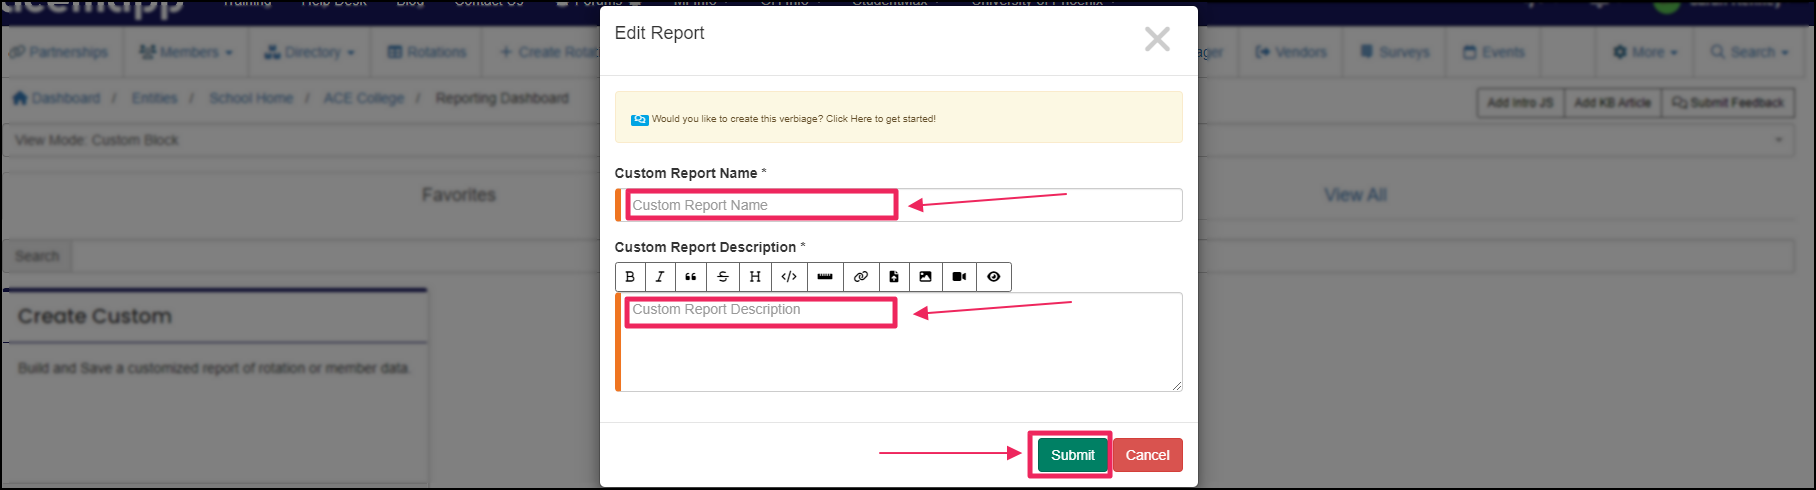 Image shows Custom Report Name and Custom Report Description fields, along with Submit button.